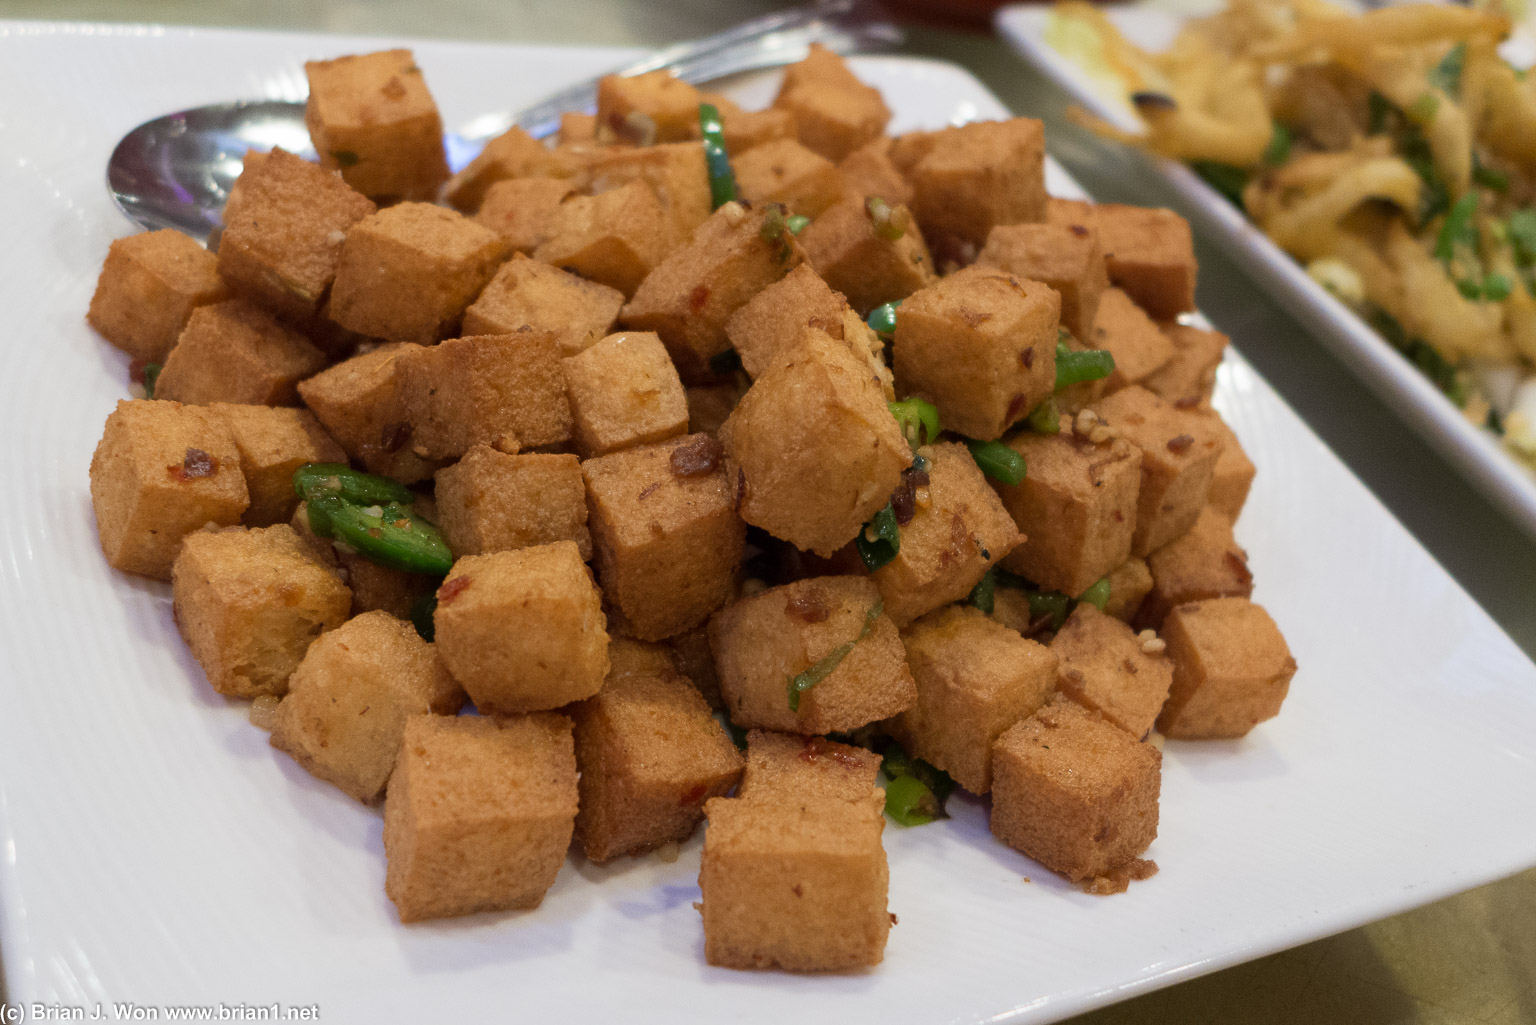 Deep fried tofu. Tasty but more of a tea shop snack as opposed to a dinner dish.